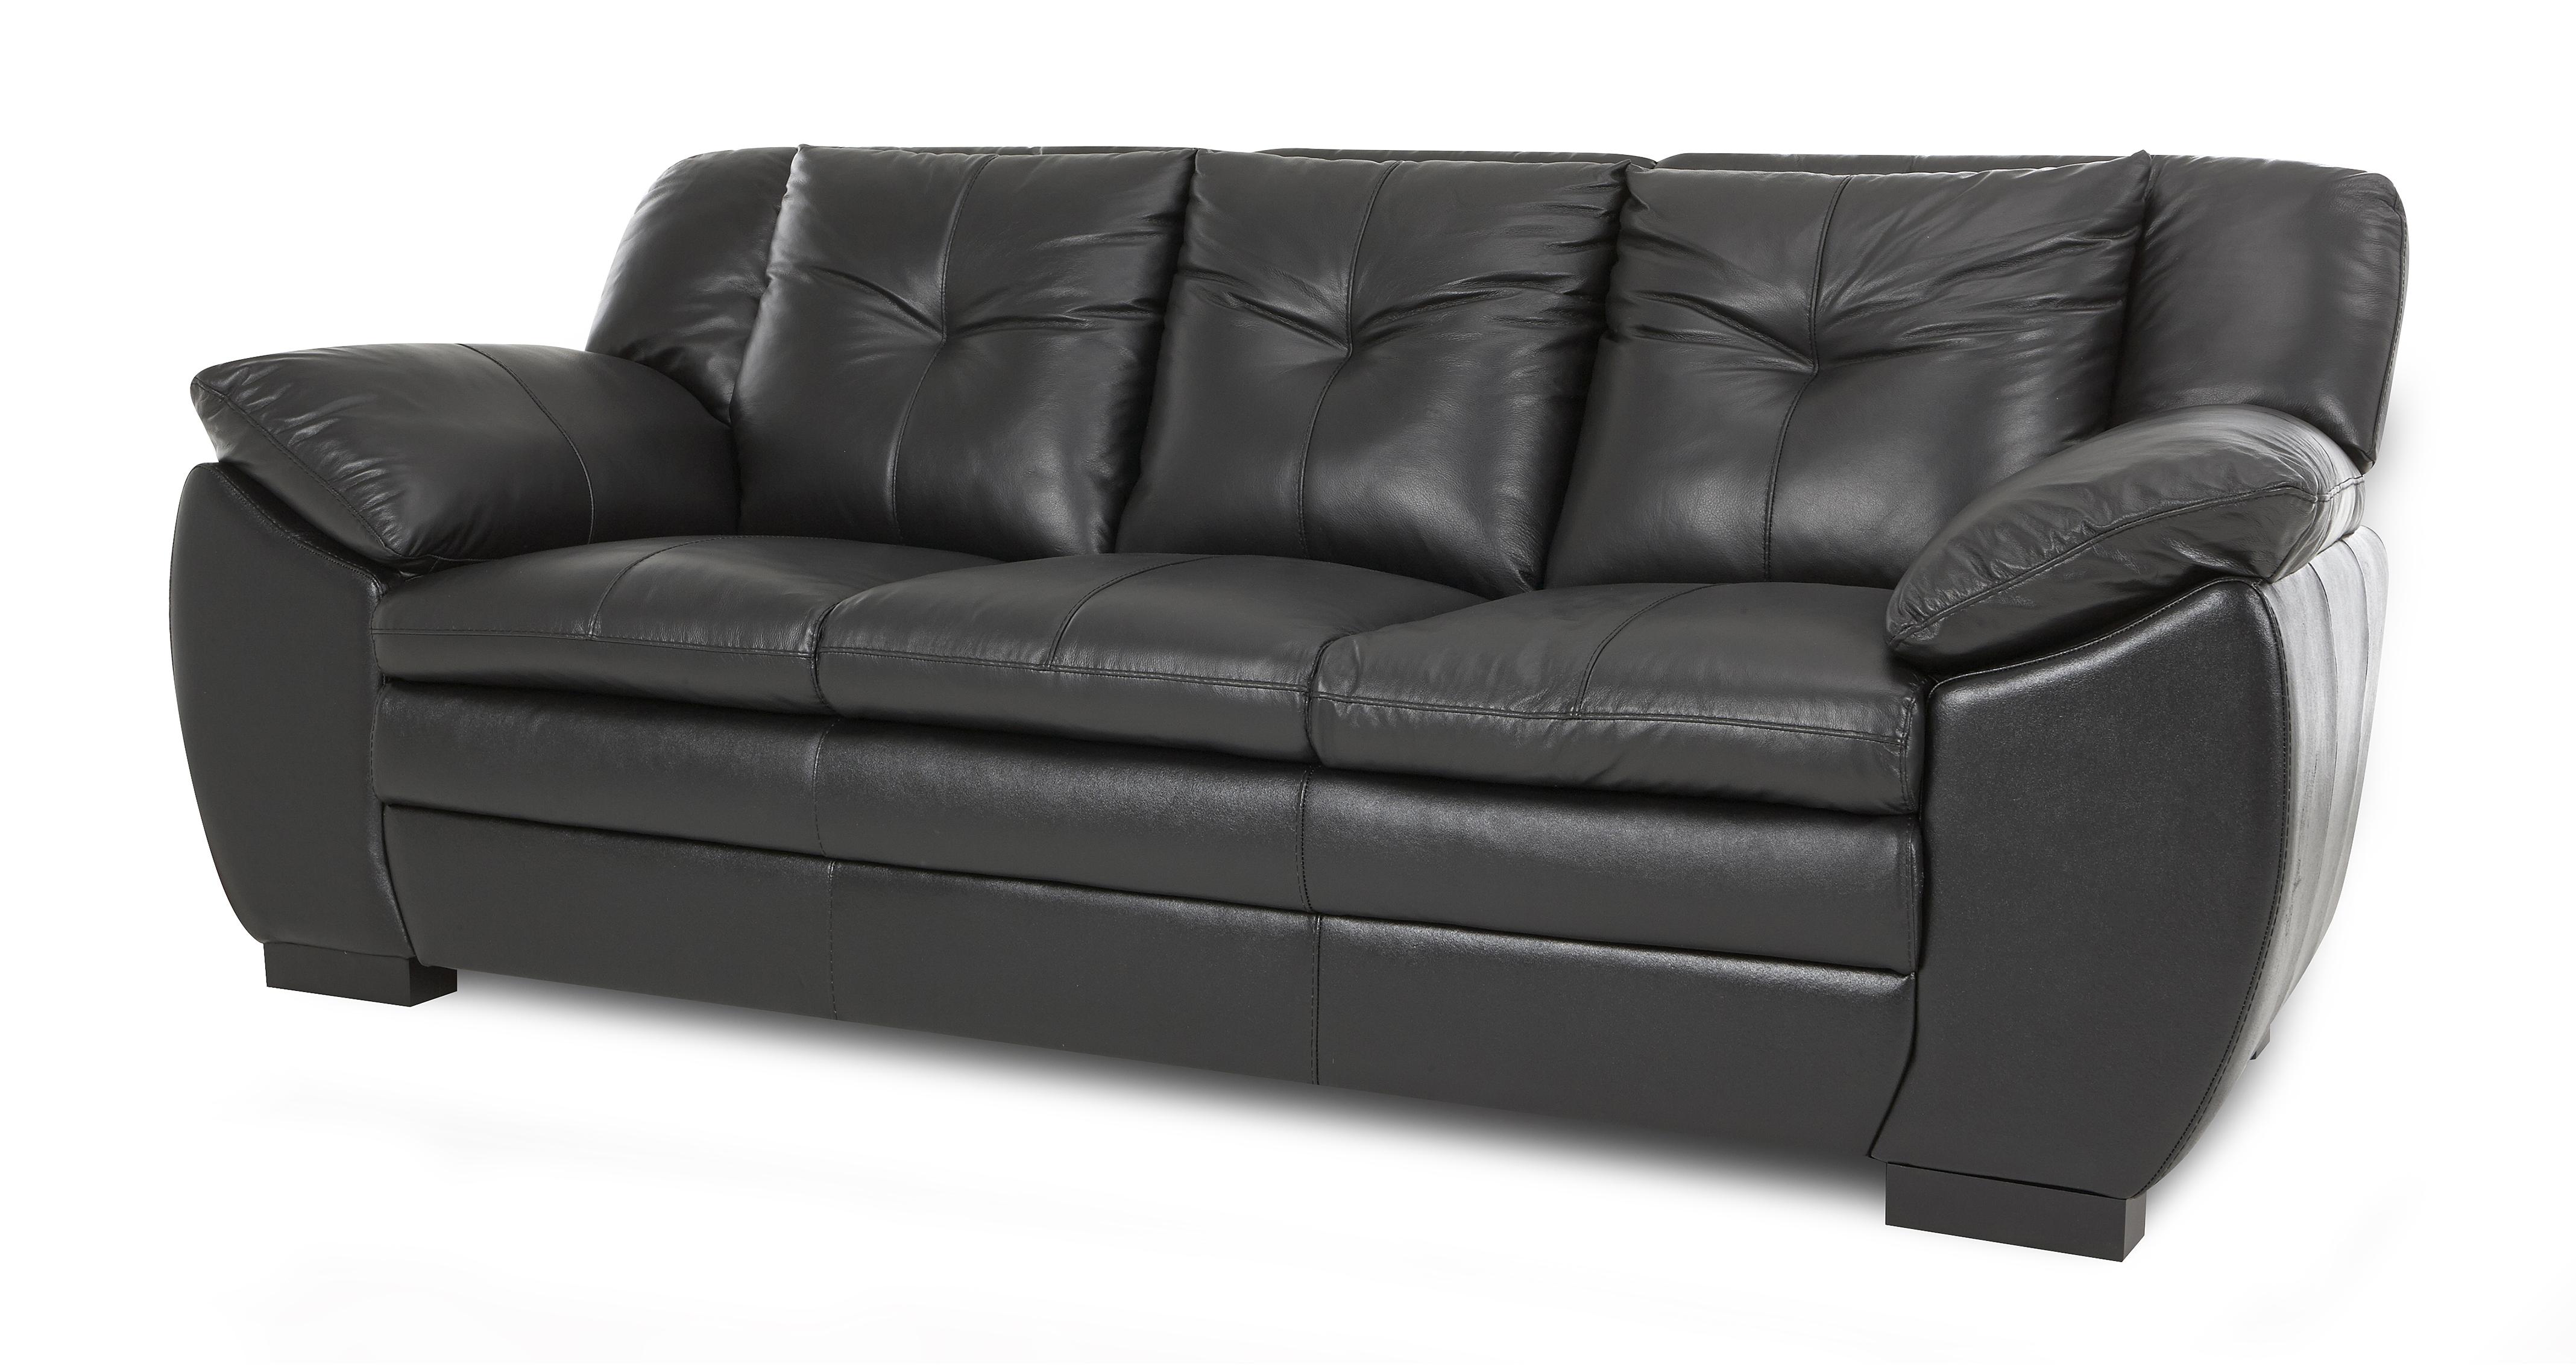 dfs leather sofa bed ebay